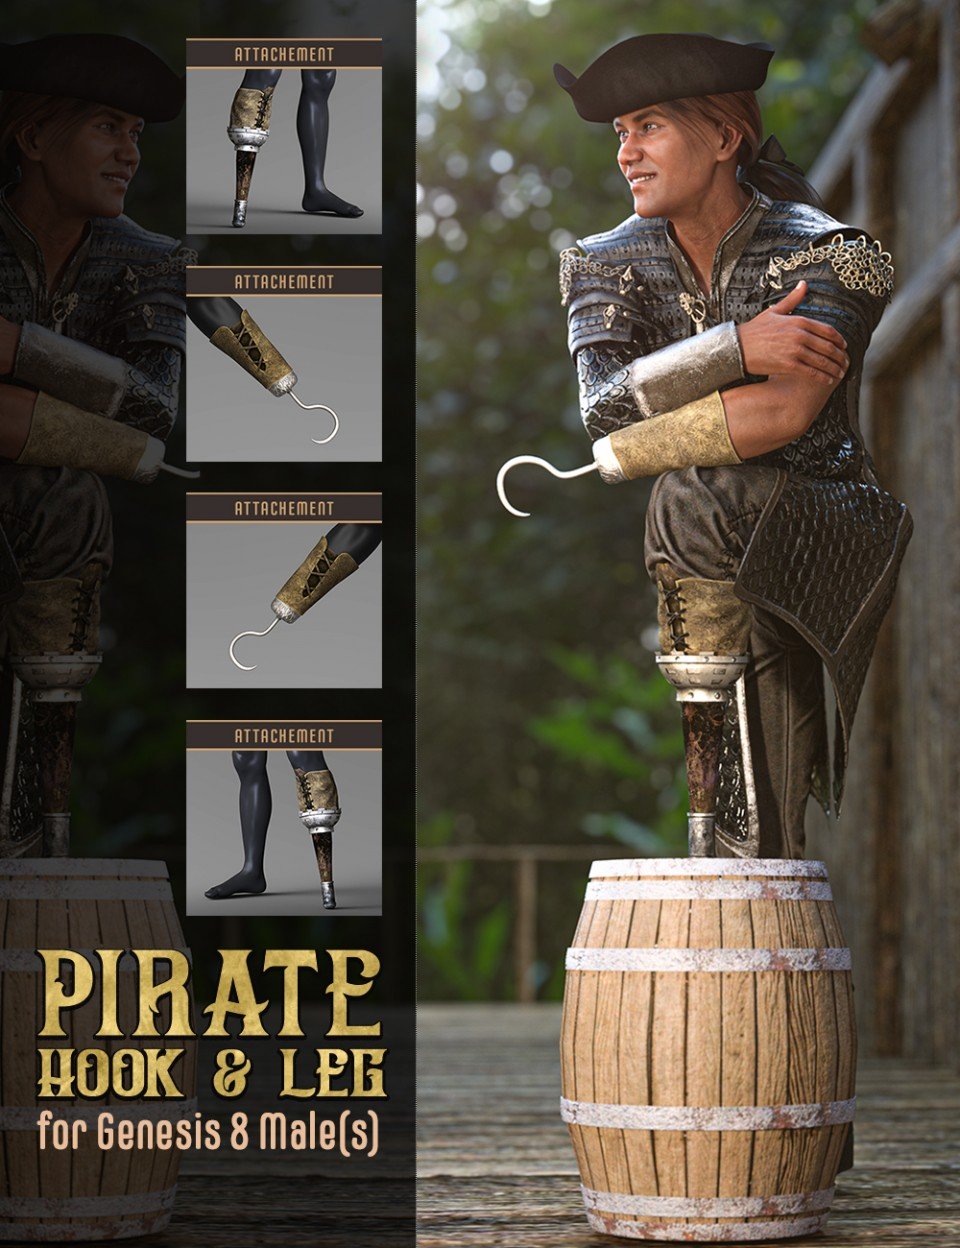 Pirate Hook and Leg for Genesis 8 Male(s)_DAZ3D下载站